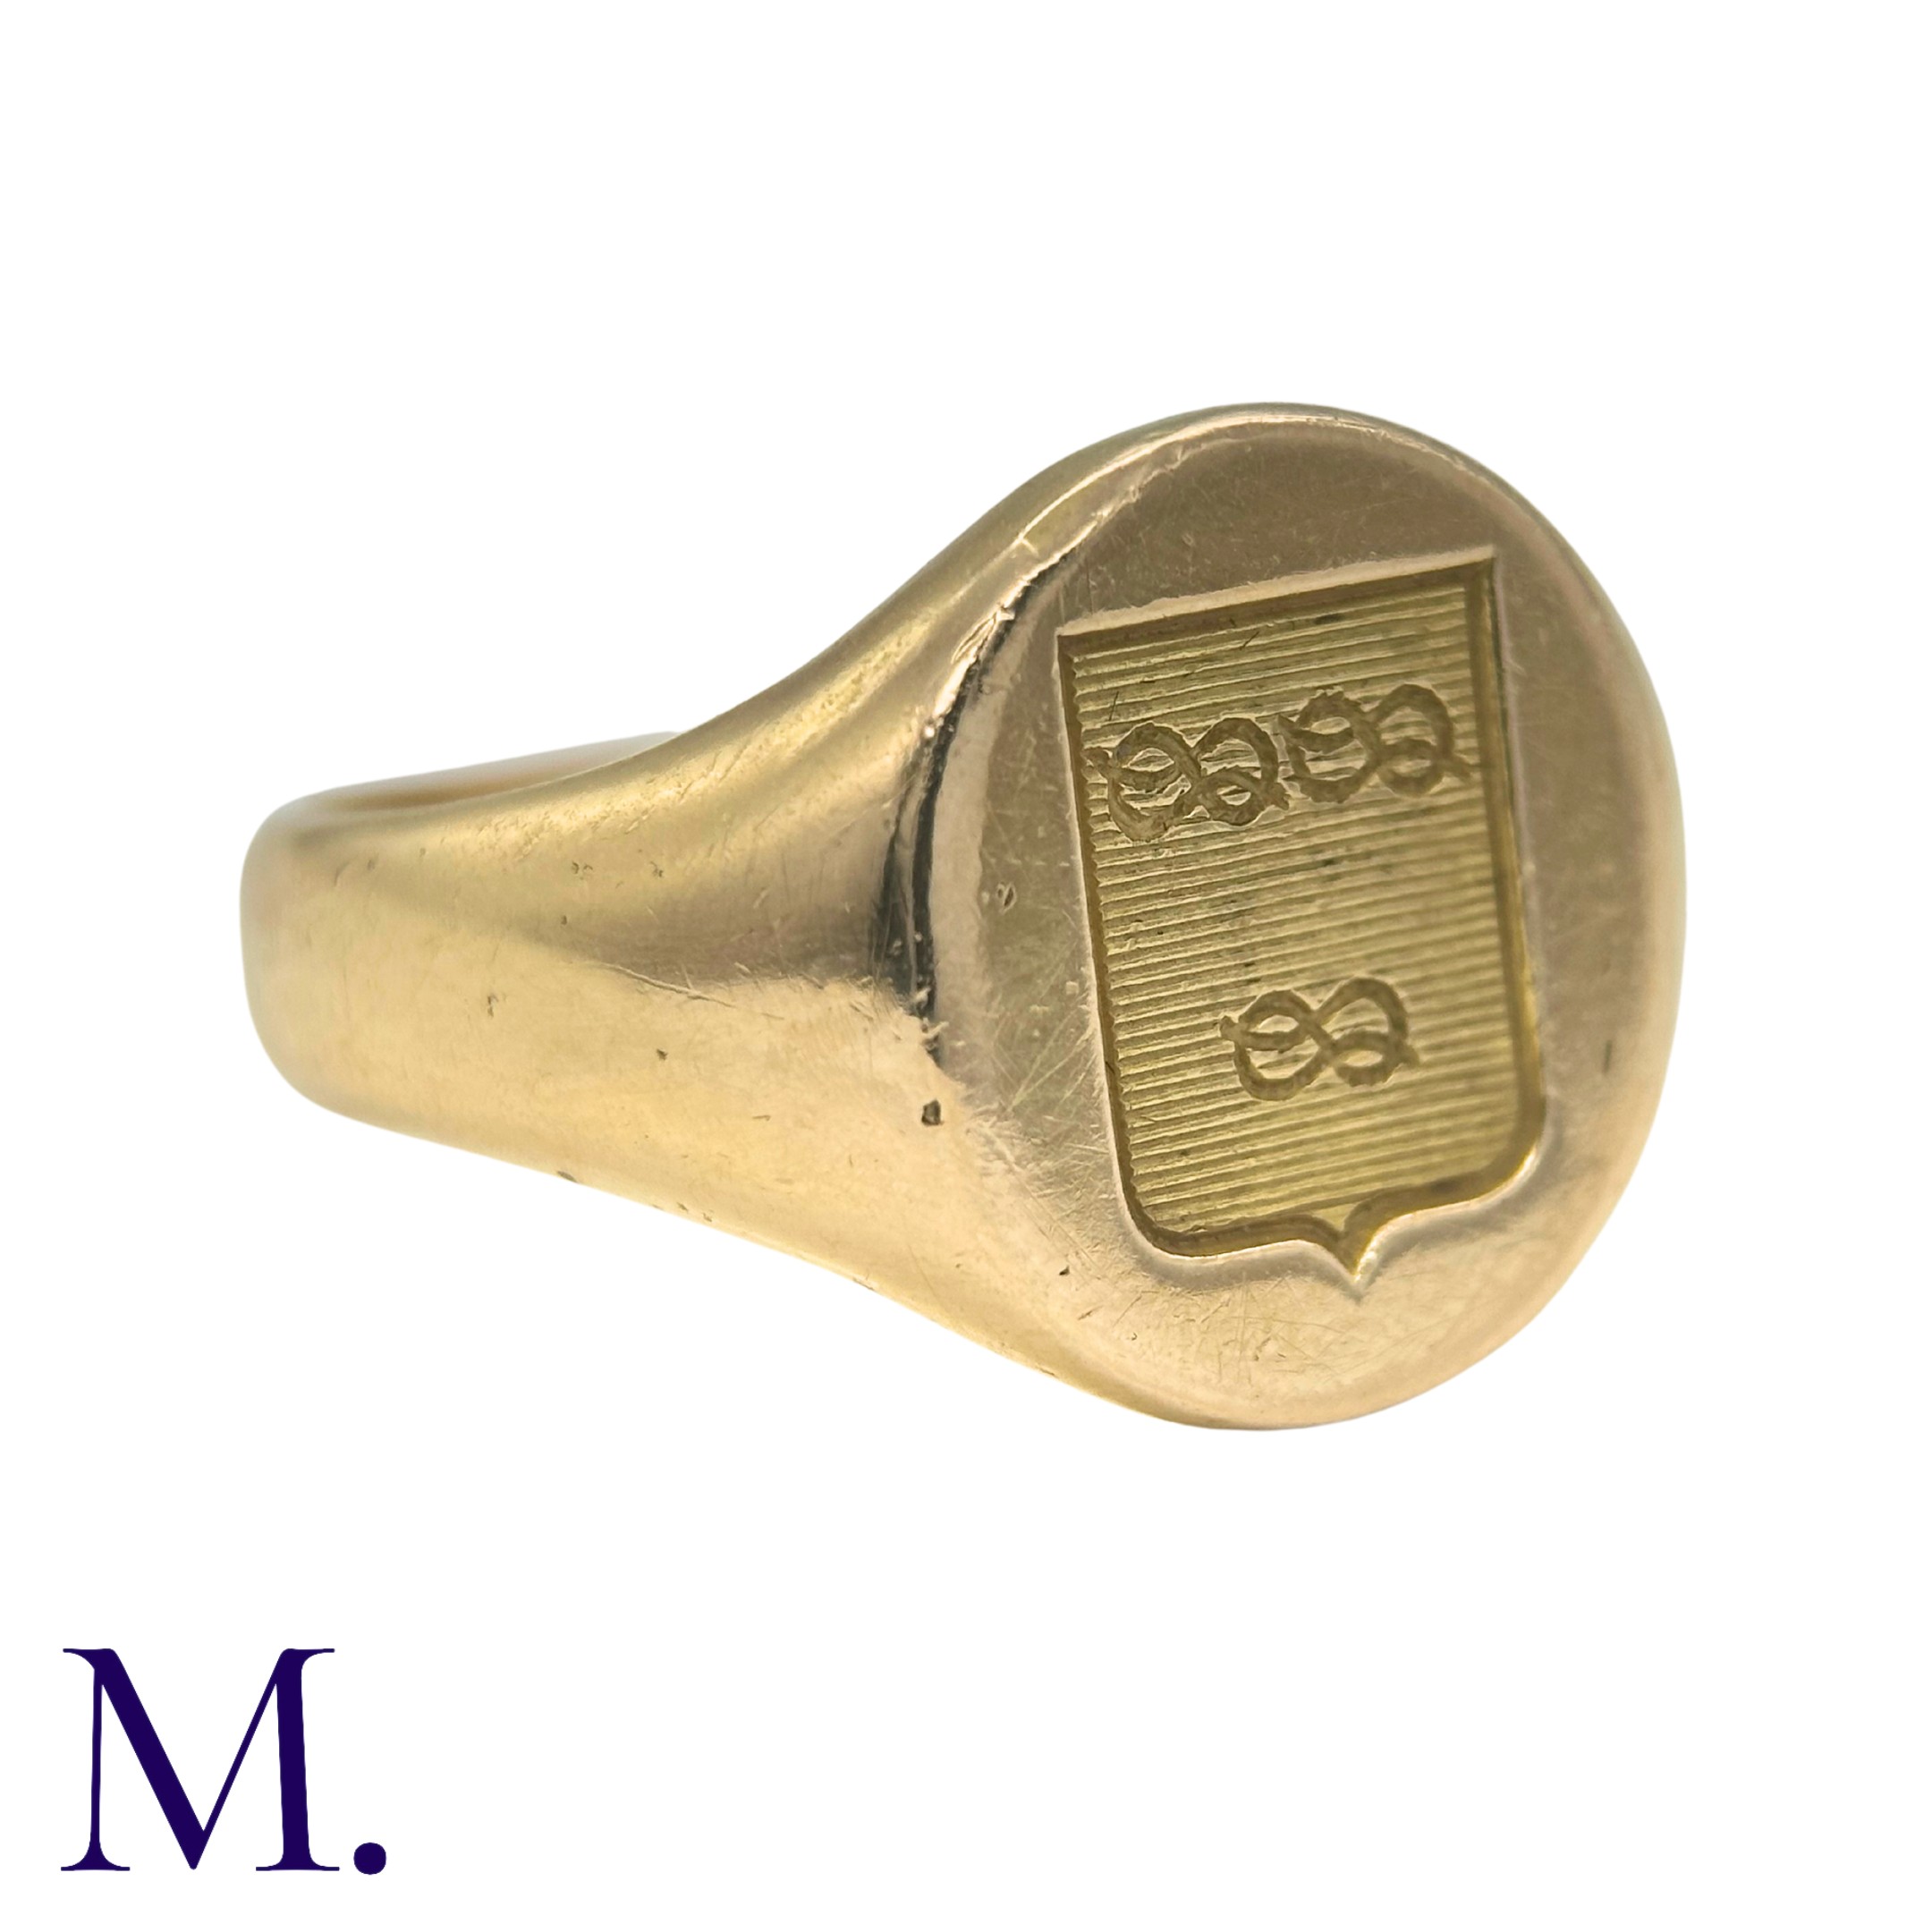 A Gold Signet Ring in 18K yellow gold. French mark unclear but tests indicate 18ct gold. Size: O - Image 3 of 4